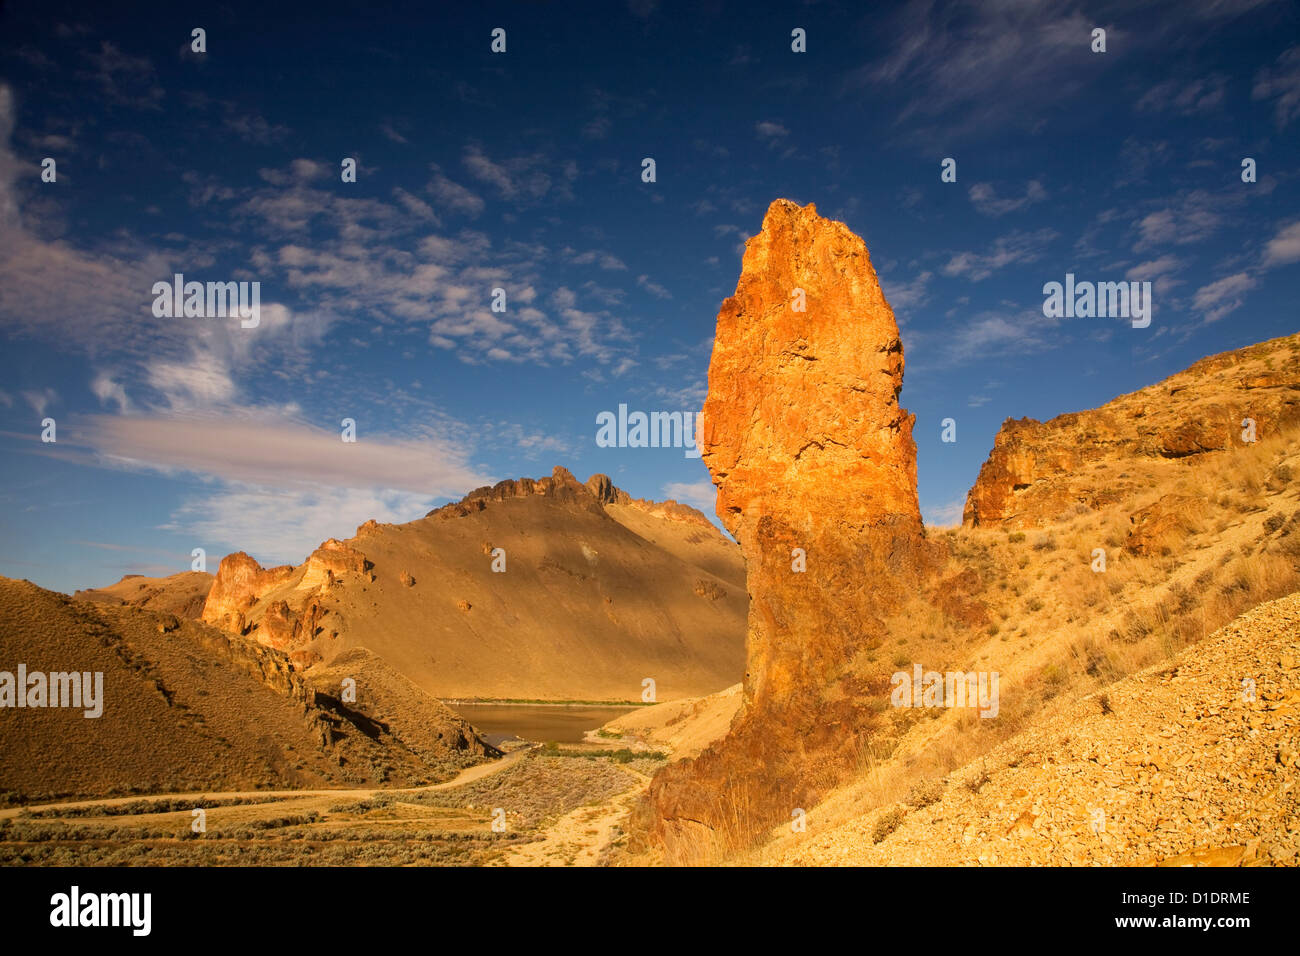 OR00887-00...OREGON - Spires of eroded volcanic tuff in Leslie Gulch near the shores of Lake Owyhee. Stock Photo